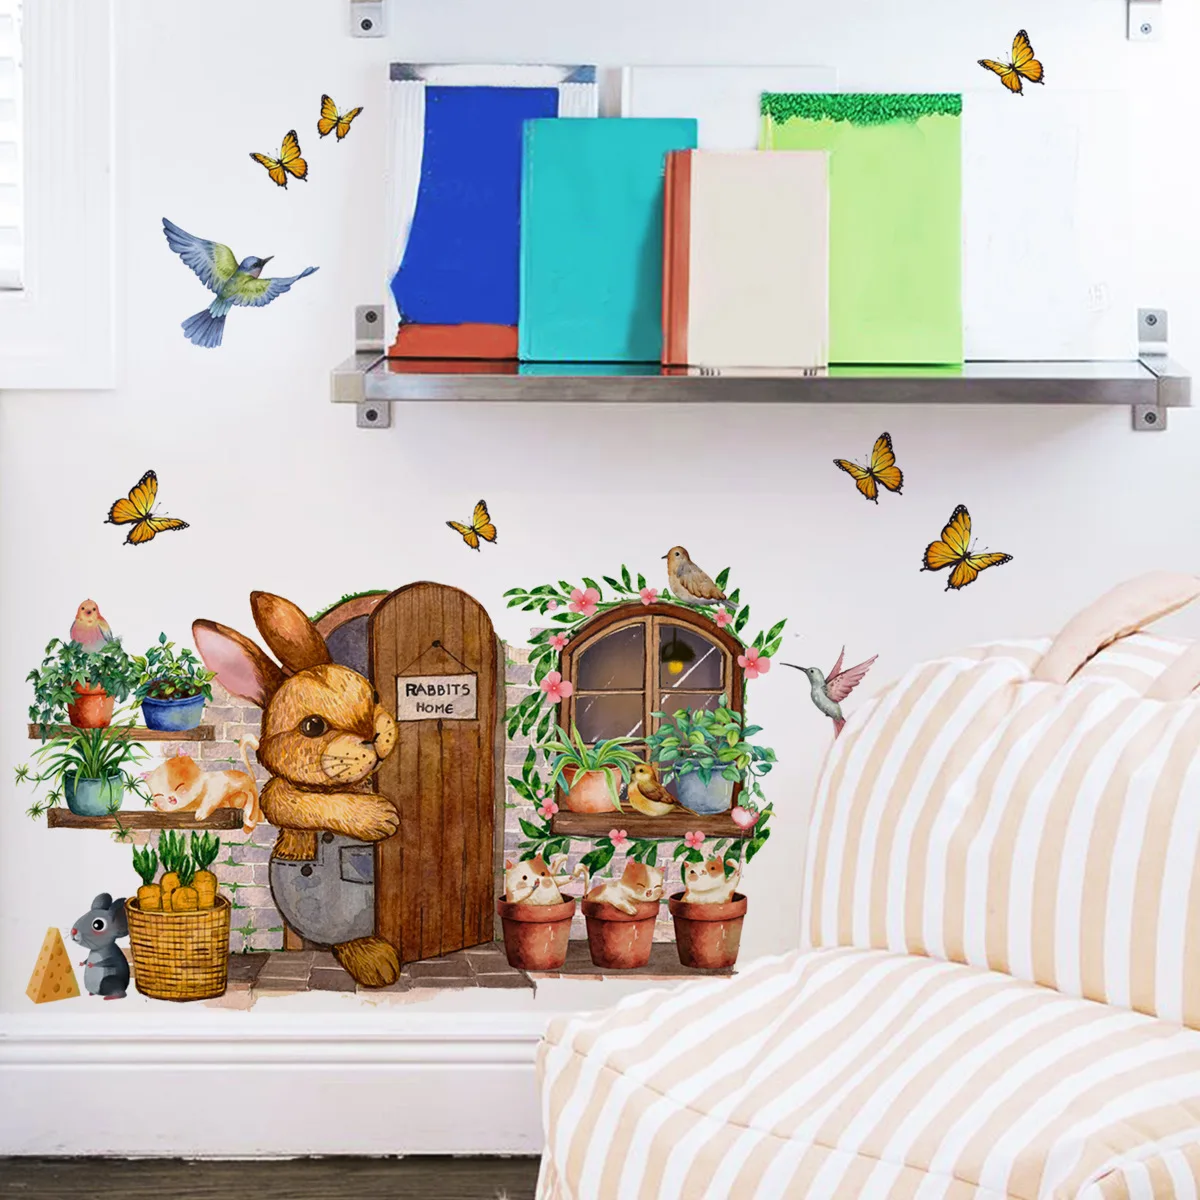 30*45cm Bunny Potted Butterfly Cartoon Animal Wall Sticker Living Room Bedroom Study Restaurant Decorative Mural Wall Sticker rabbit bookend resin animal figurines bunny book ends rabbit statue decorative bookends for shelf living room cabinet ornaments